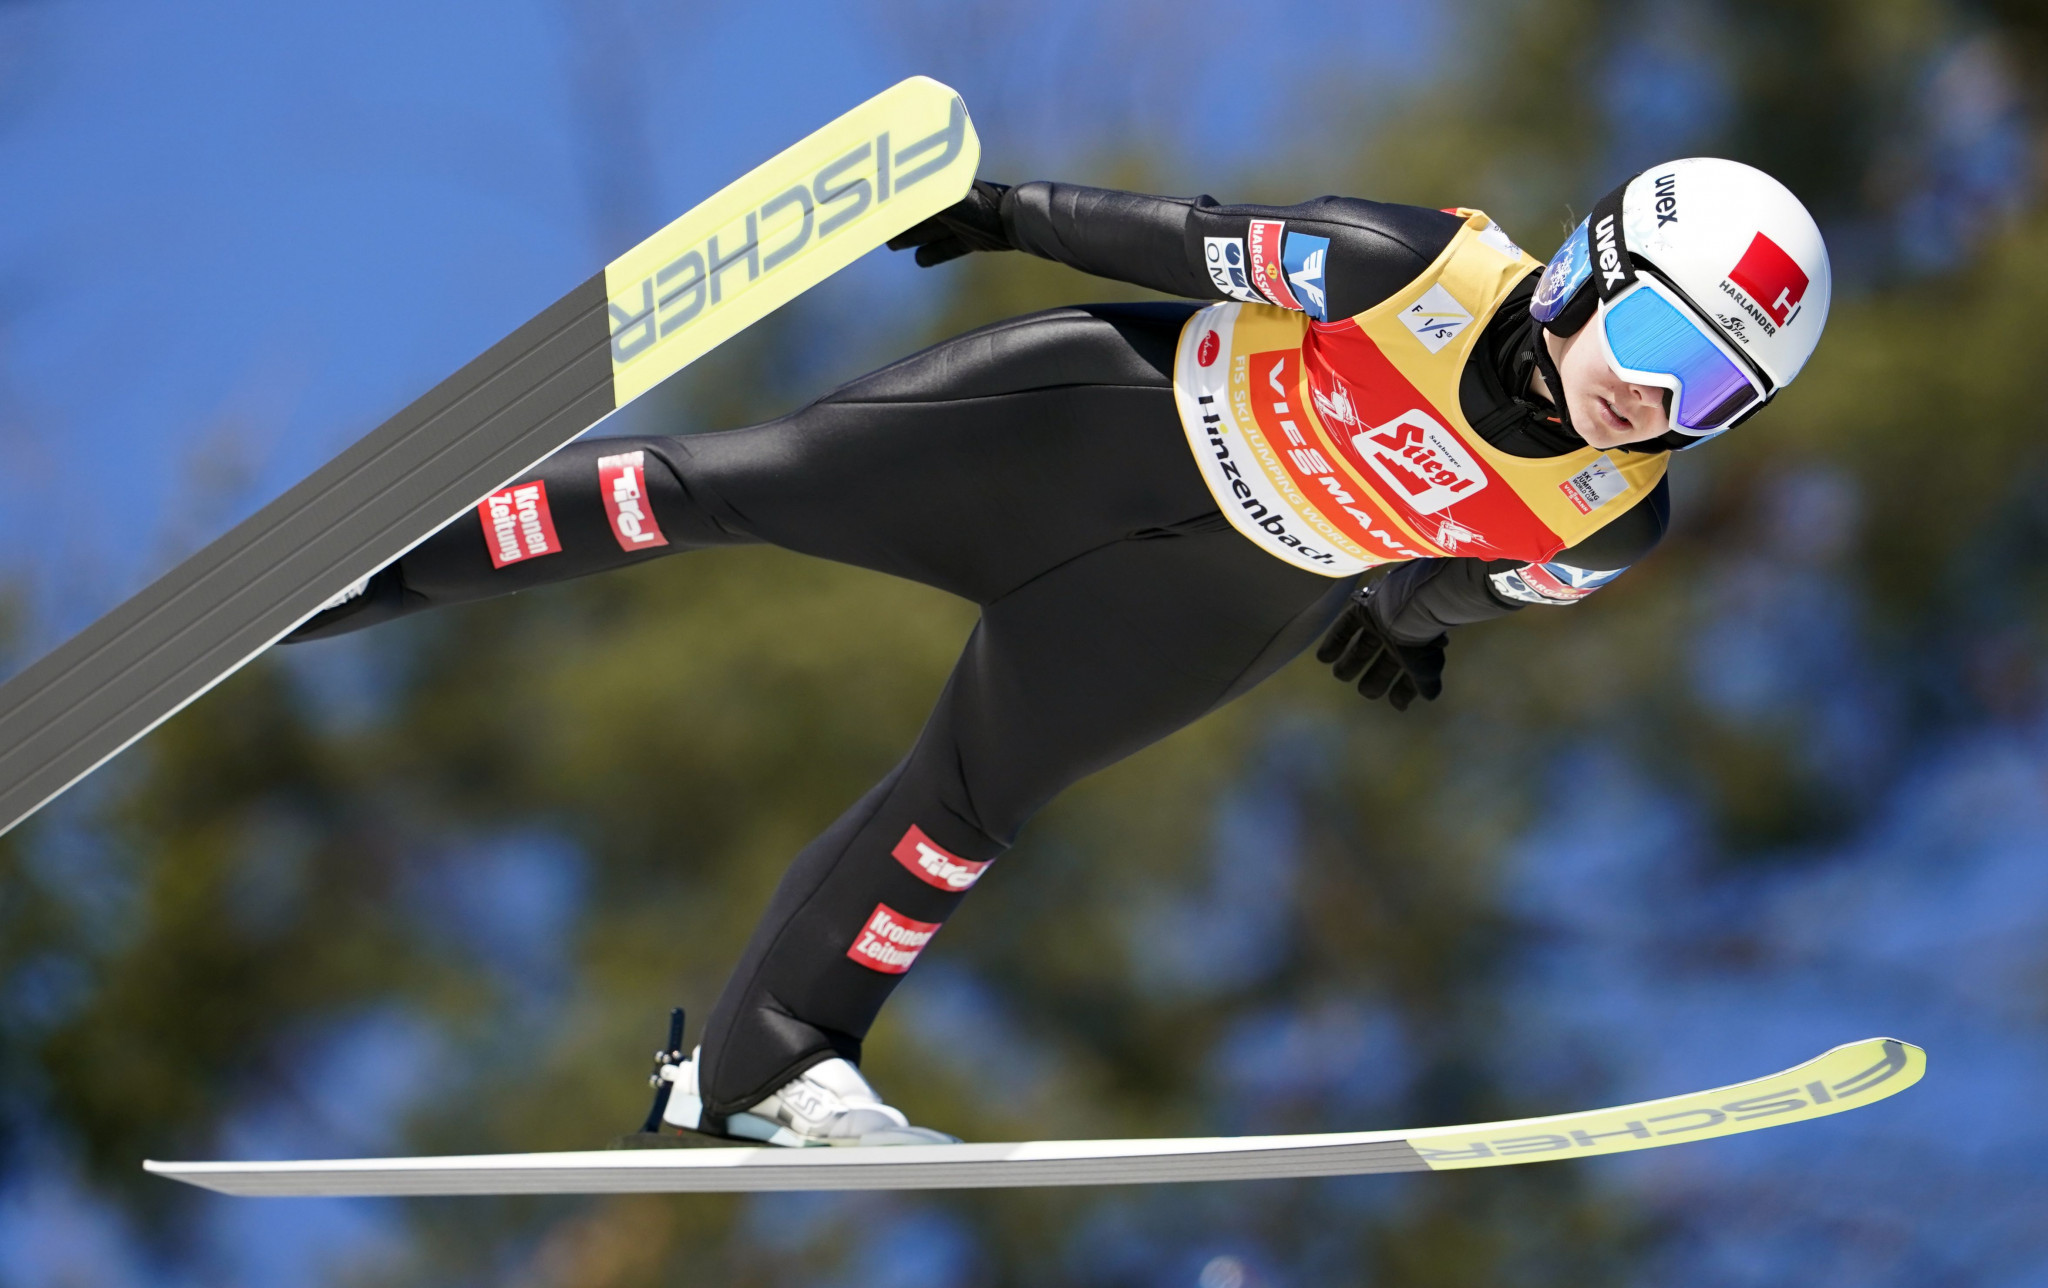 Chiara Hölzl continued her winning streak at the FIS Ski Jumping World Cup event in Hinzenbach ©Getty Images